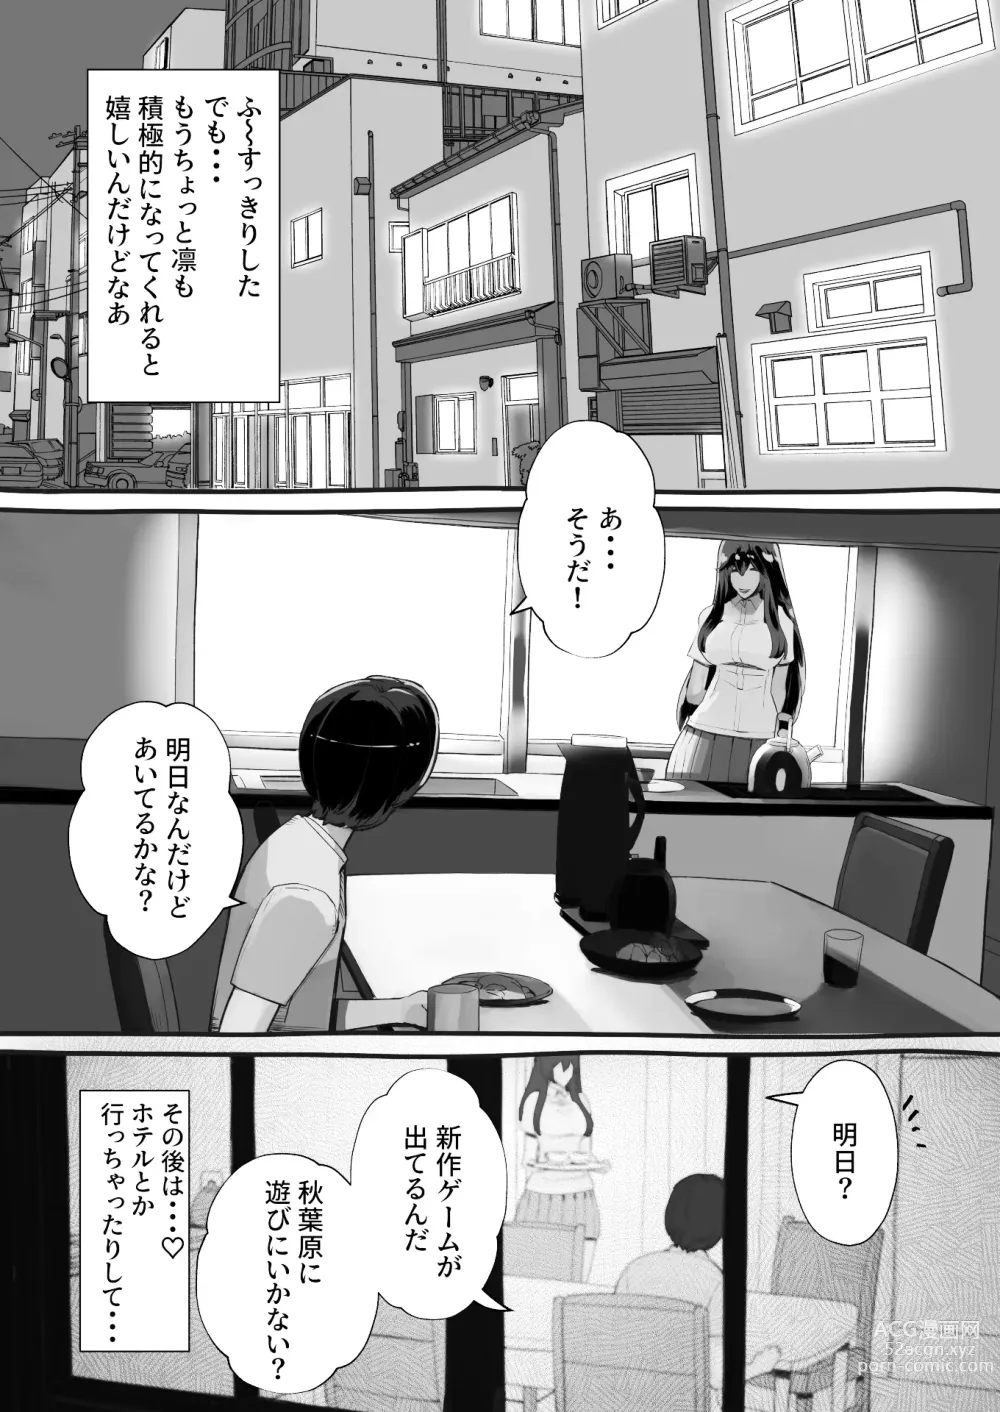 Page 11 of doujinshi 僕の彼女が他人棒で絶頂いたす